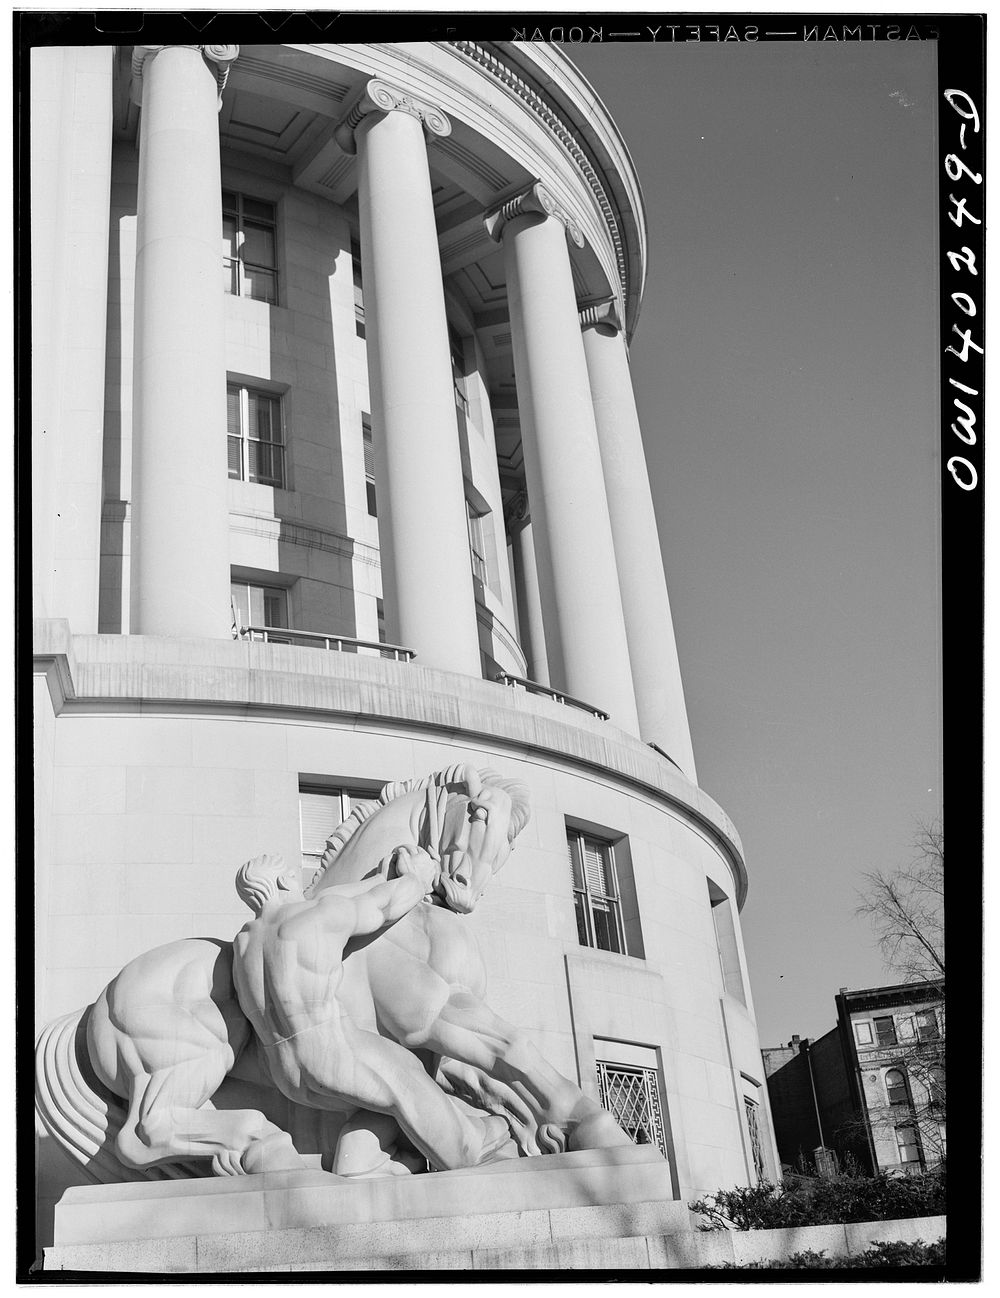 Washington, D.C. A statue in front of the Federal Trade Commission building. Sourced from the Library of Congress.